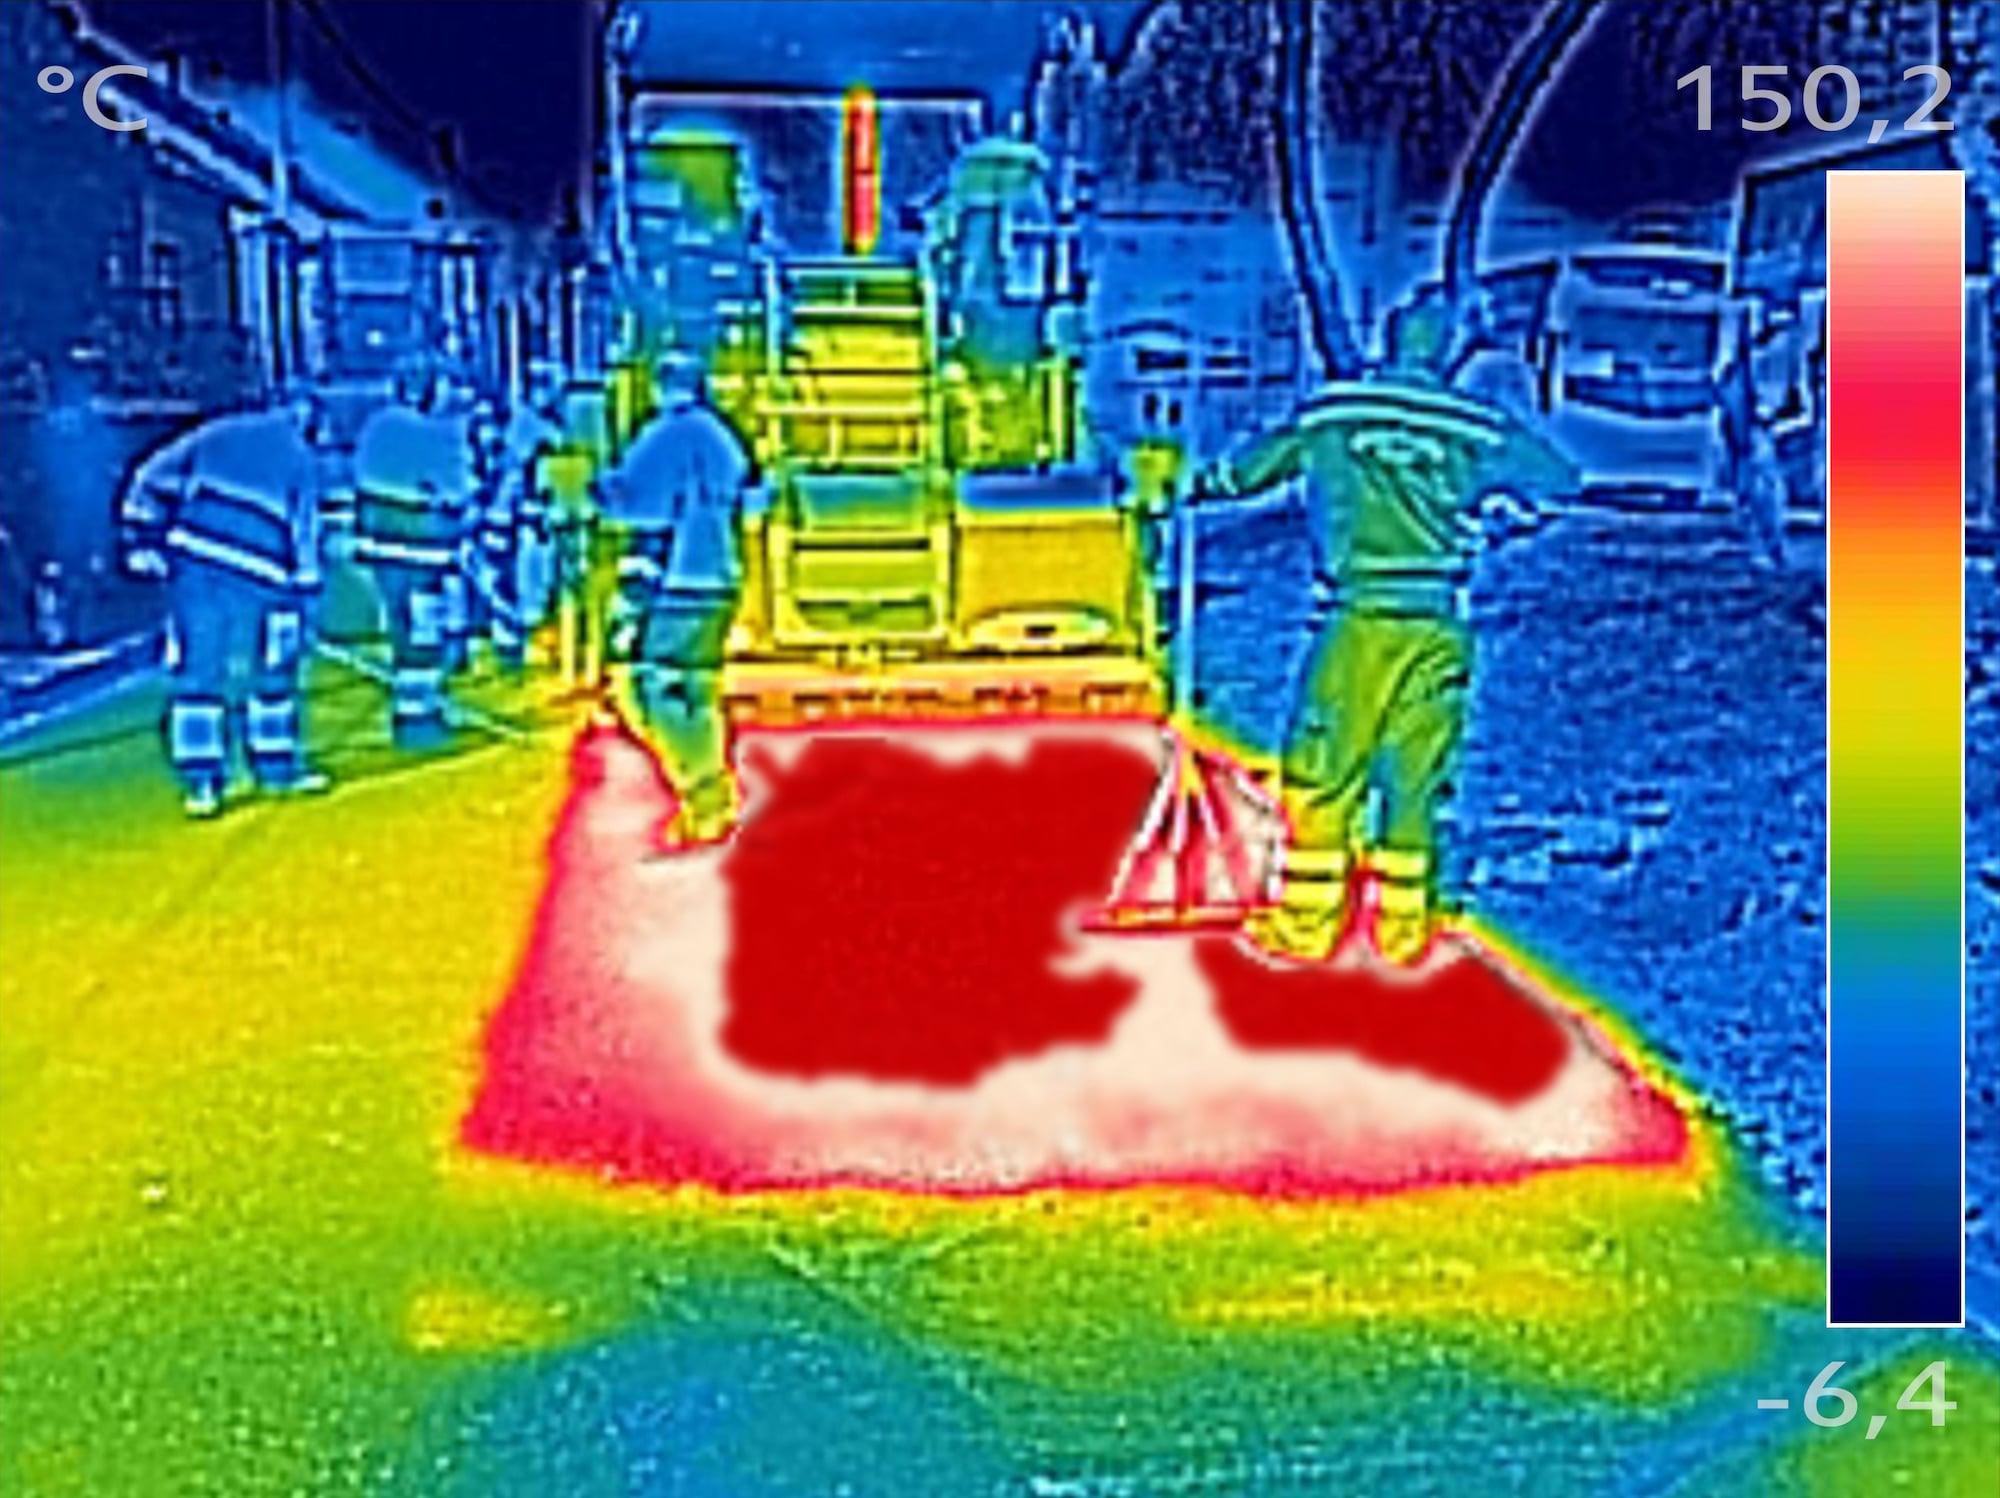 A thermal picture of workers paving a road with asphalt